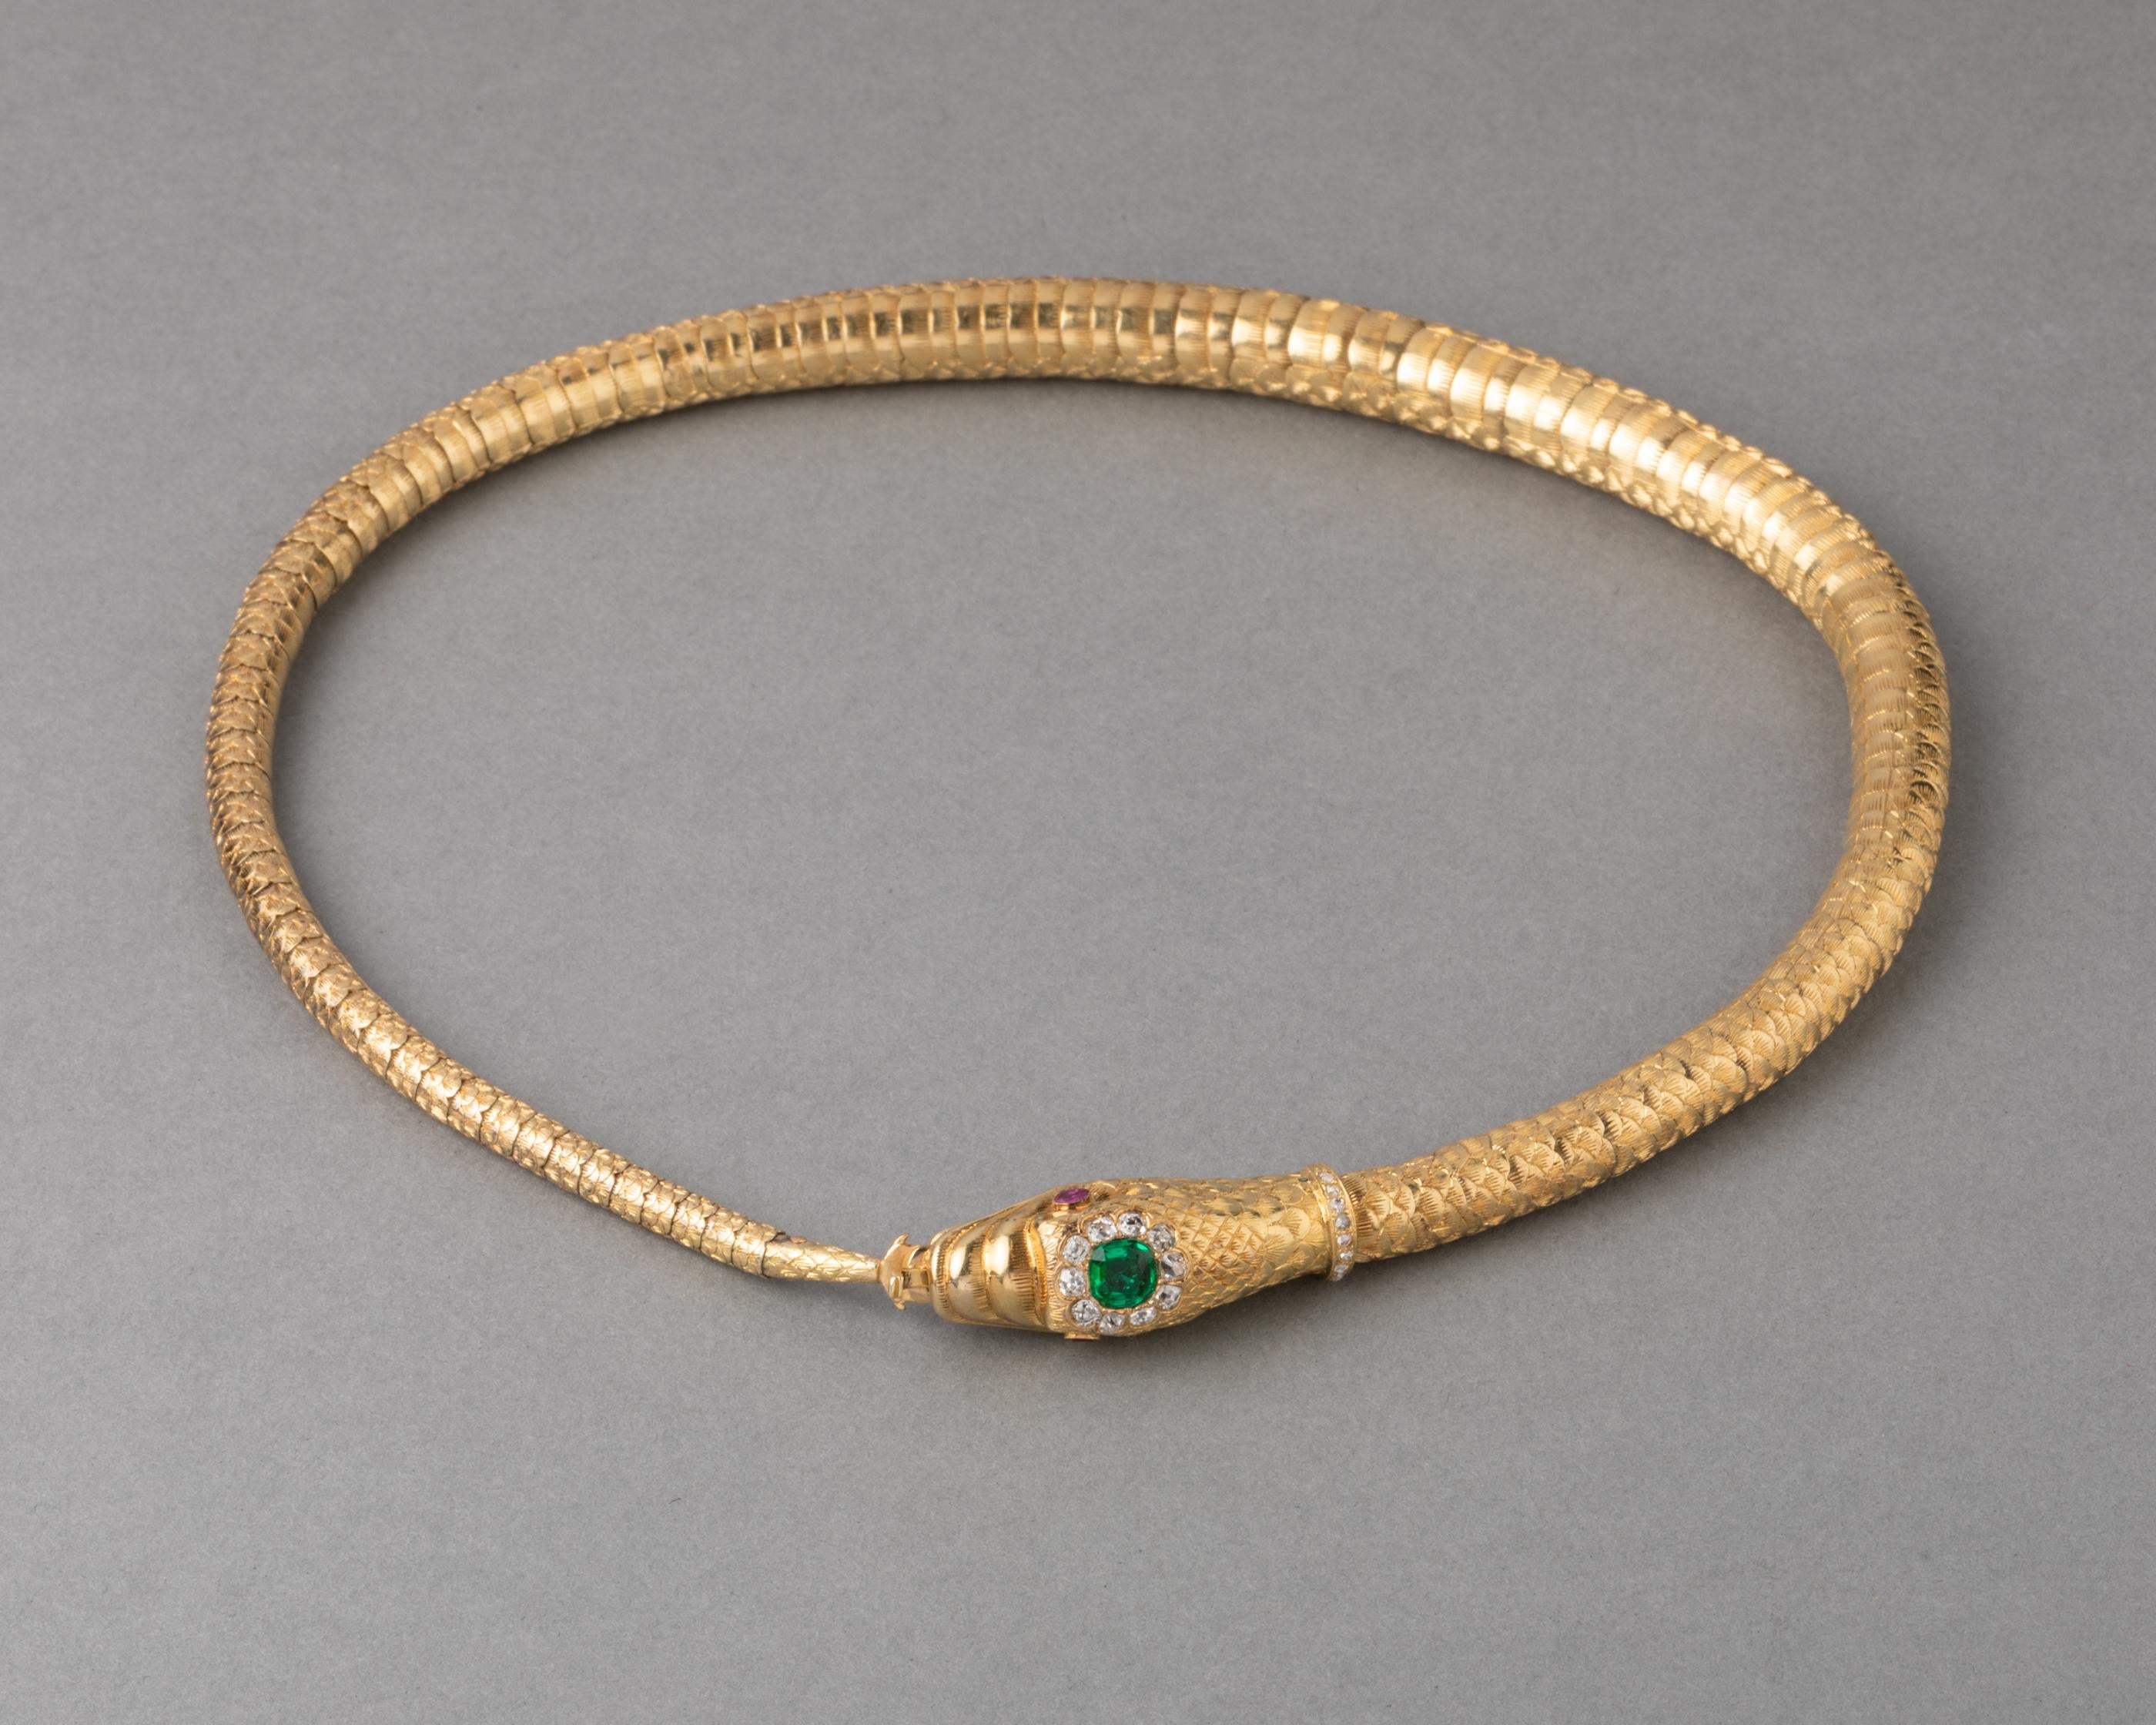 Antique Gold Emerald and Diamonds Snake Necklace

Very beautiful necklace made in France circa 1830.

The length is 37.5 cm 
Made in yellow gold 18k. Set with Emerald (1 carat estimate) and diamonds (0.60 estimate), old mine cut.
Total weight is